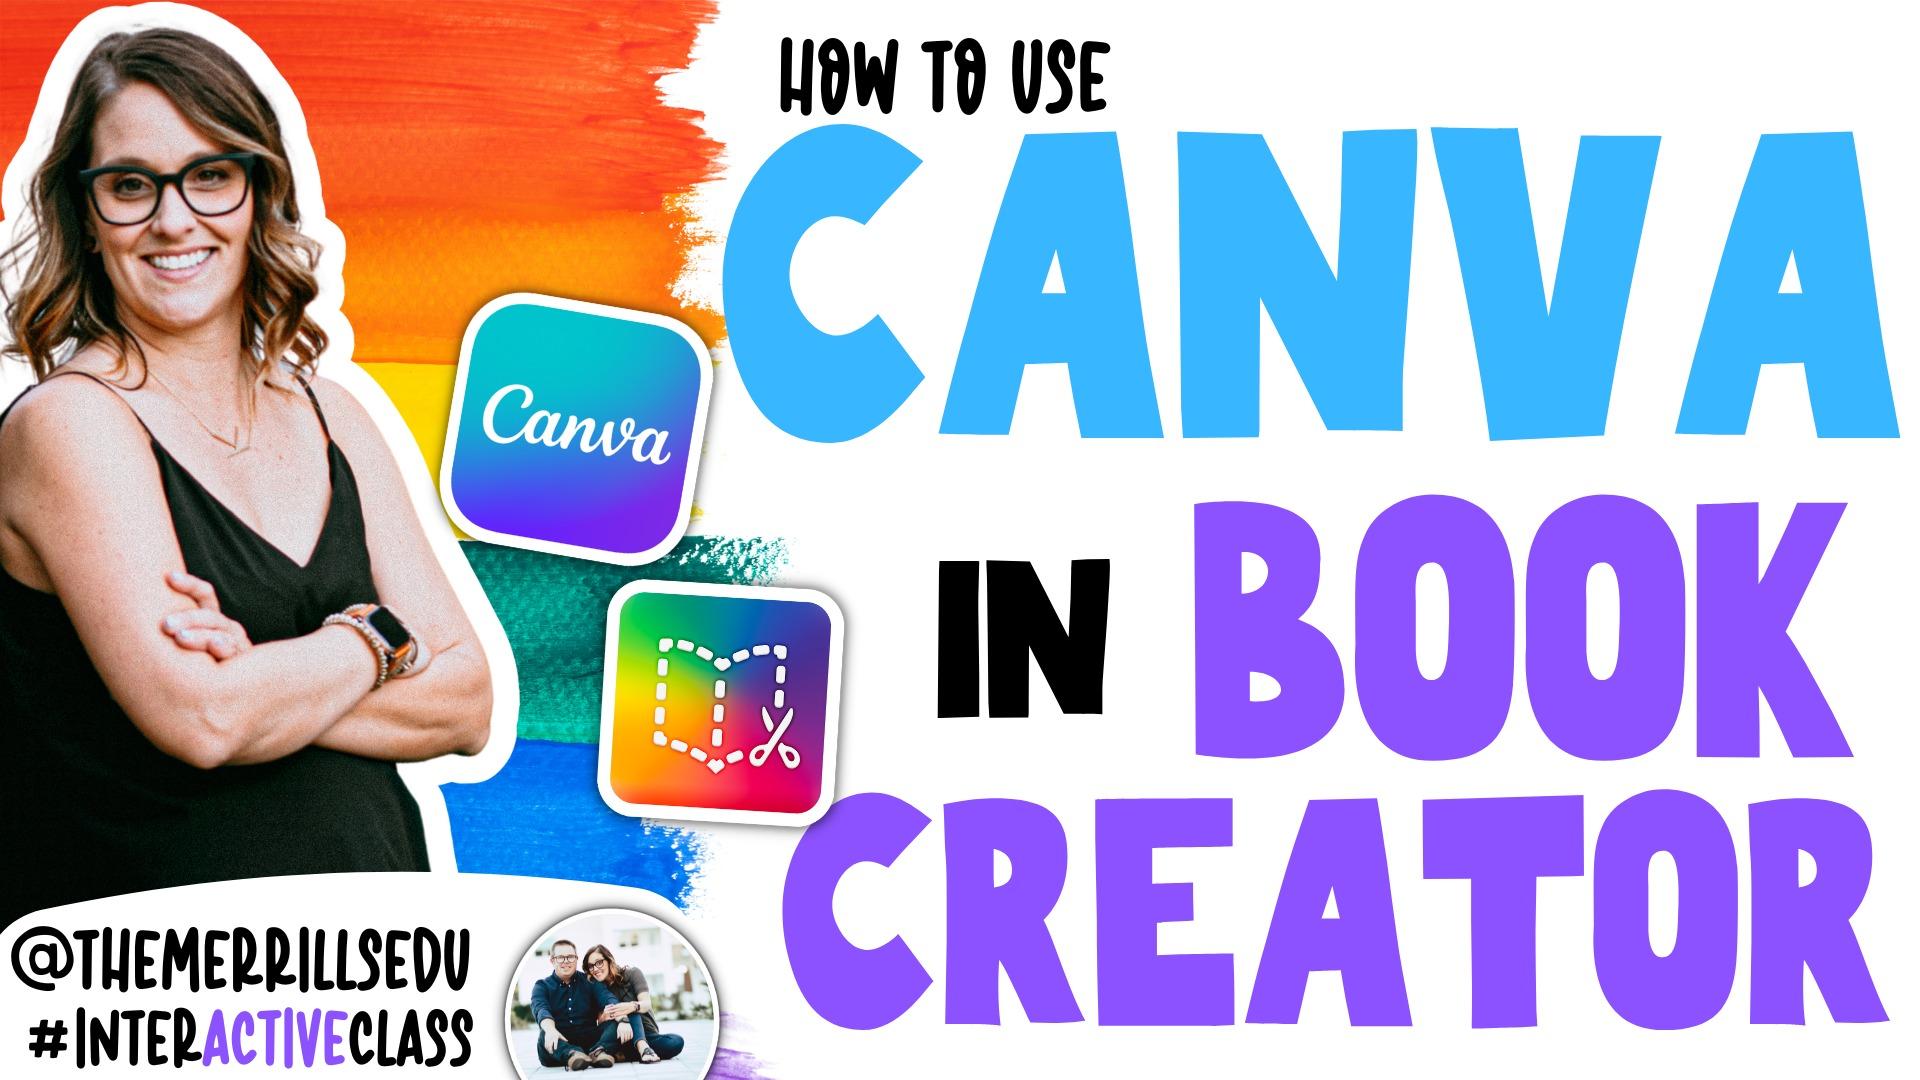 How to Use Canva with Book Creator